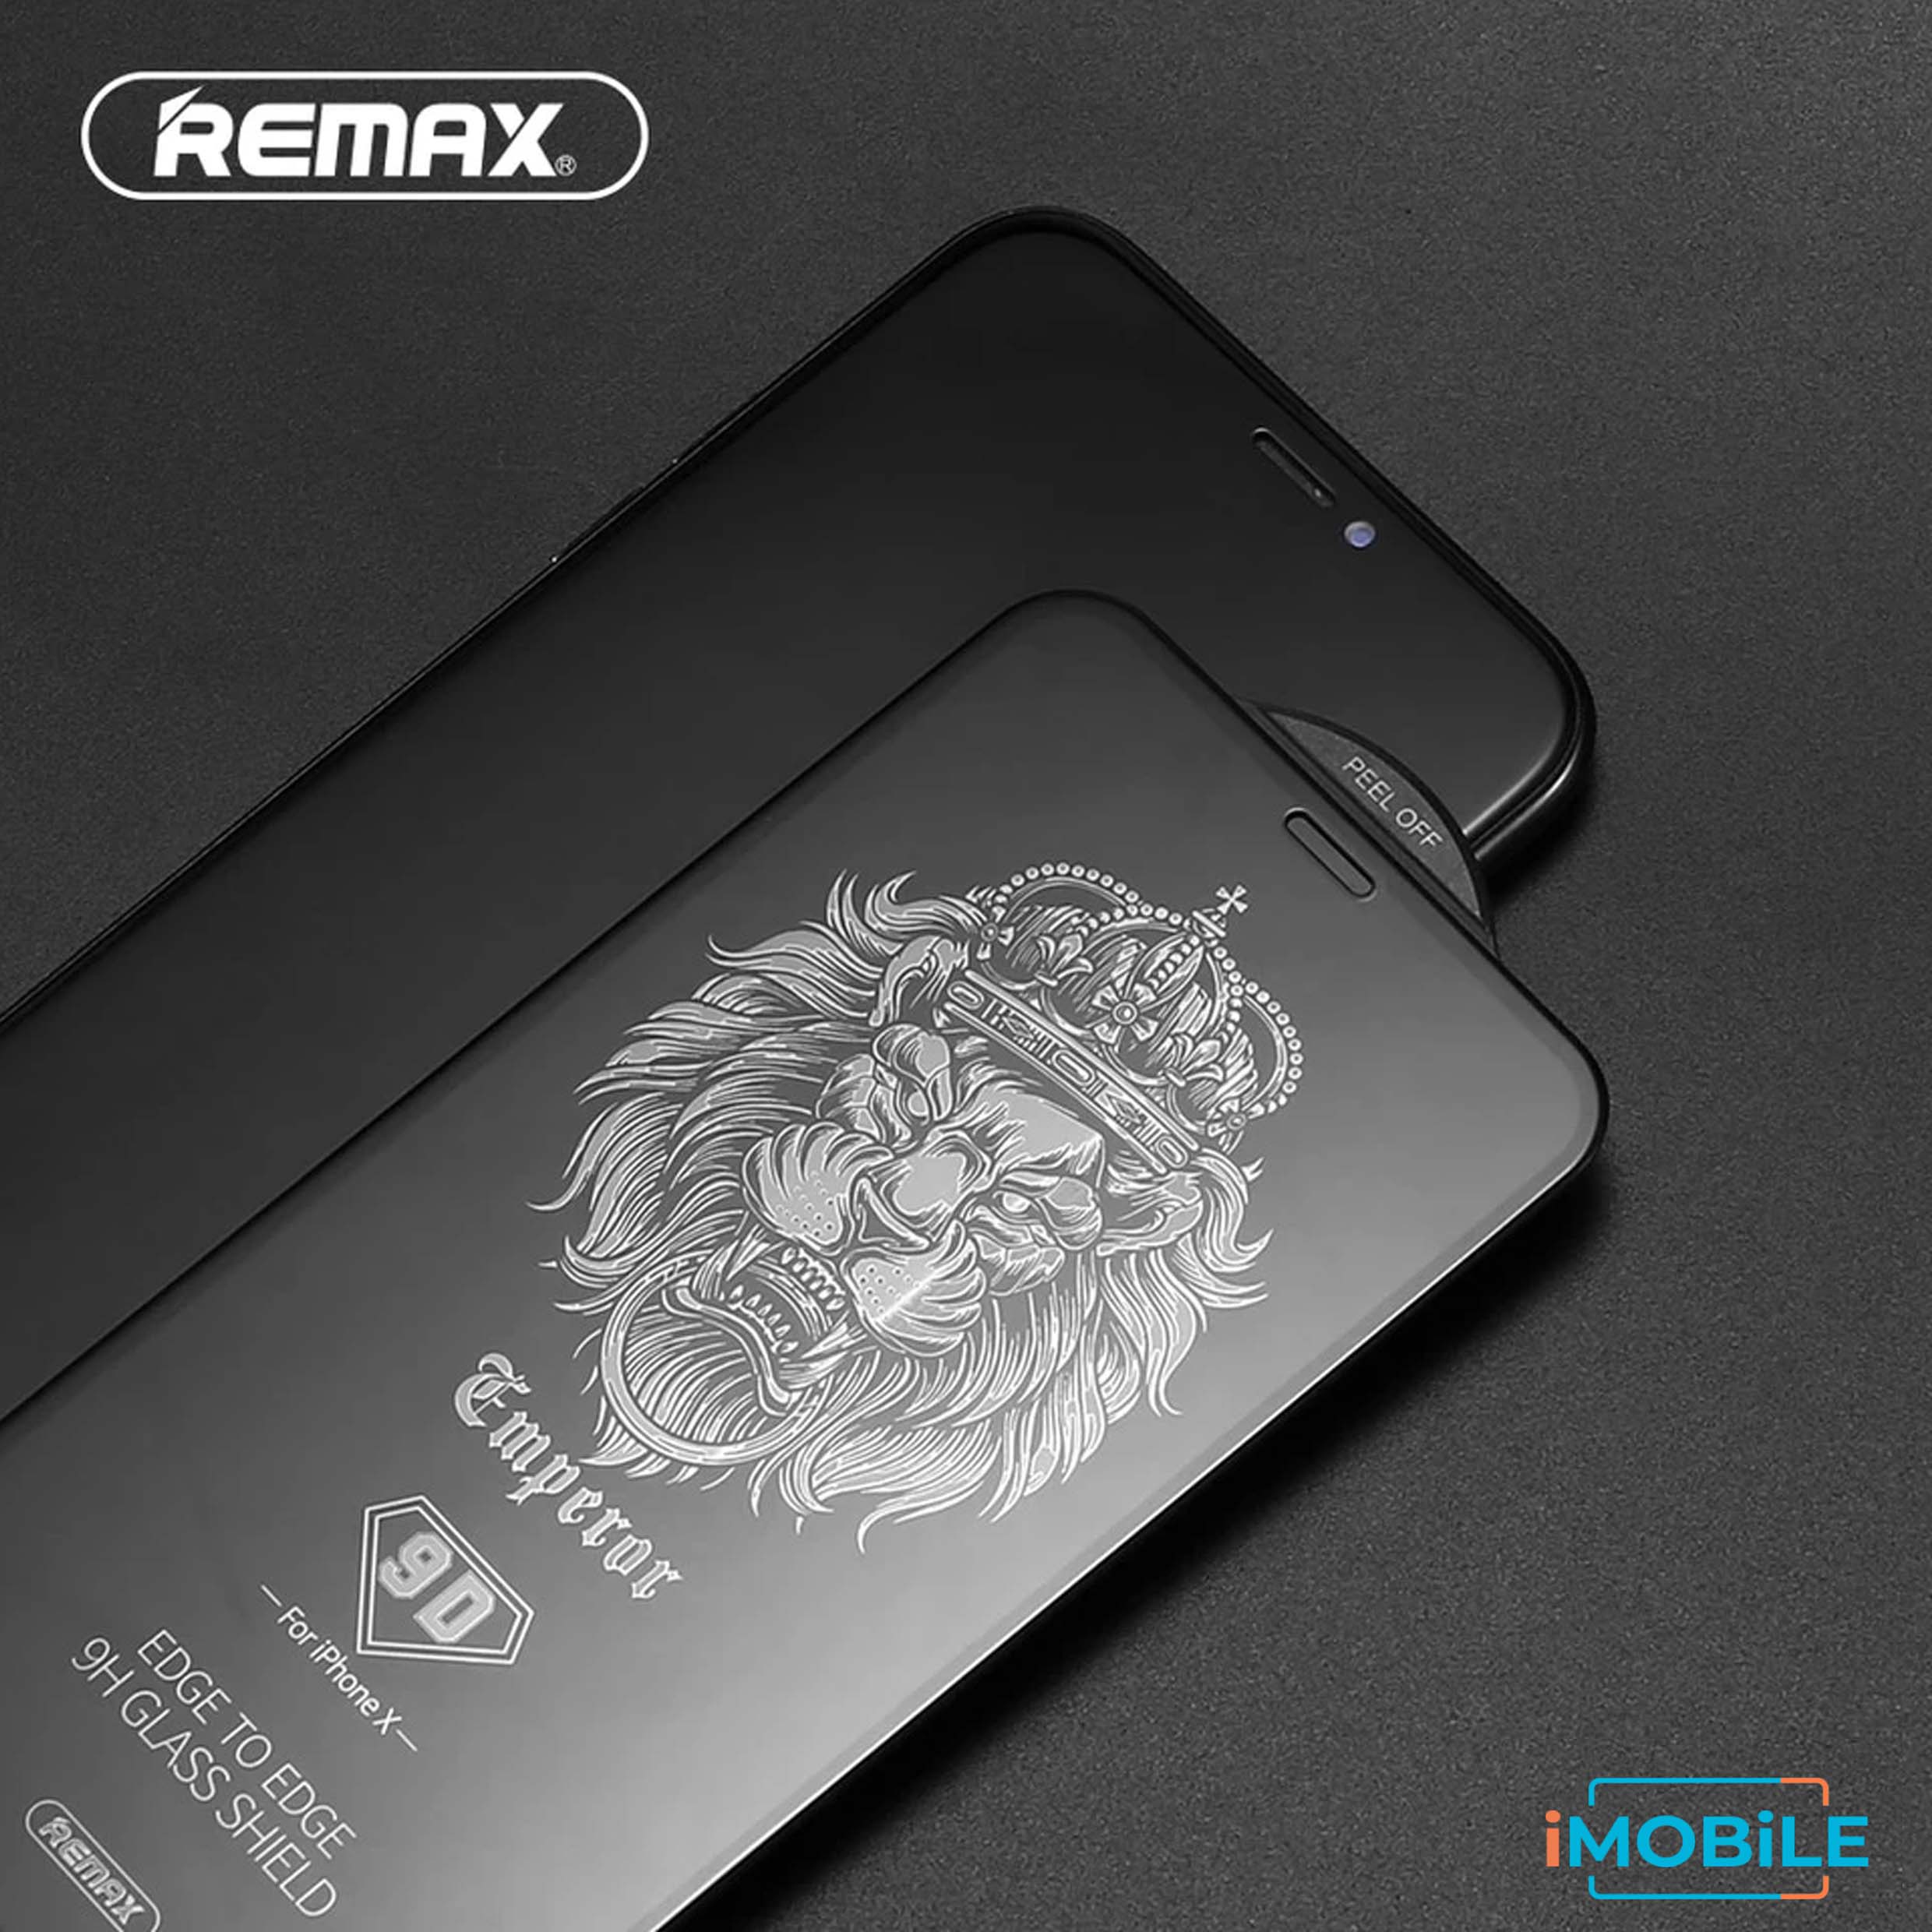 Remax 2.5D Tempered Glass with Envelope Pack, iPhone 7 Plus/8 Plus [Black]